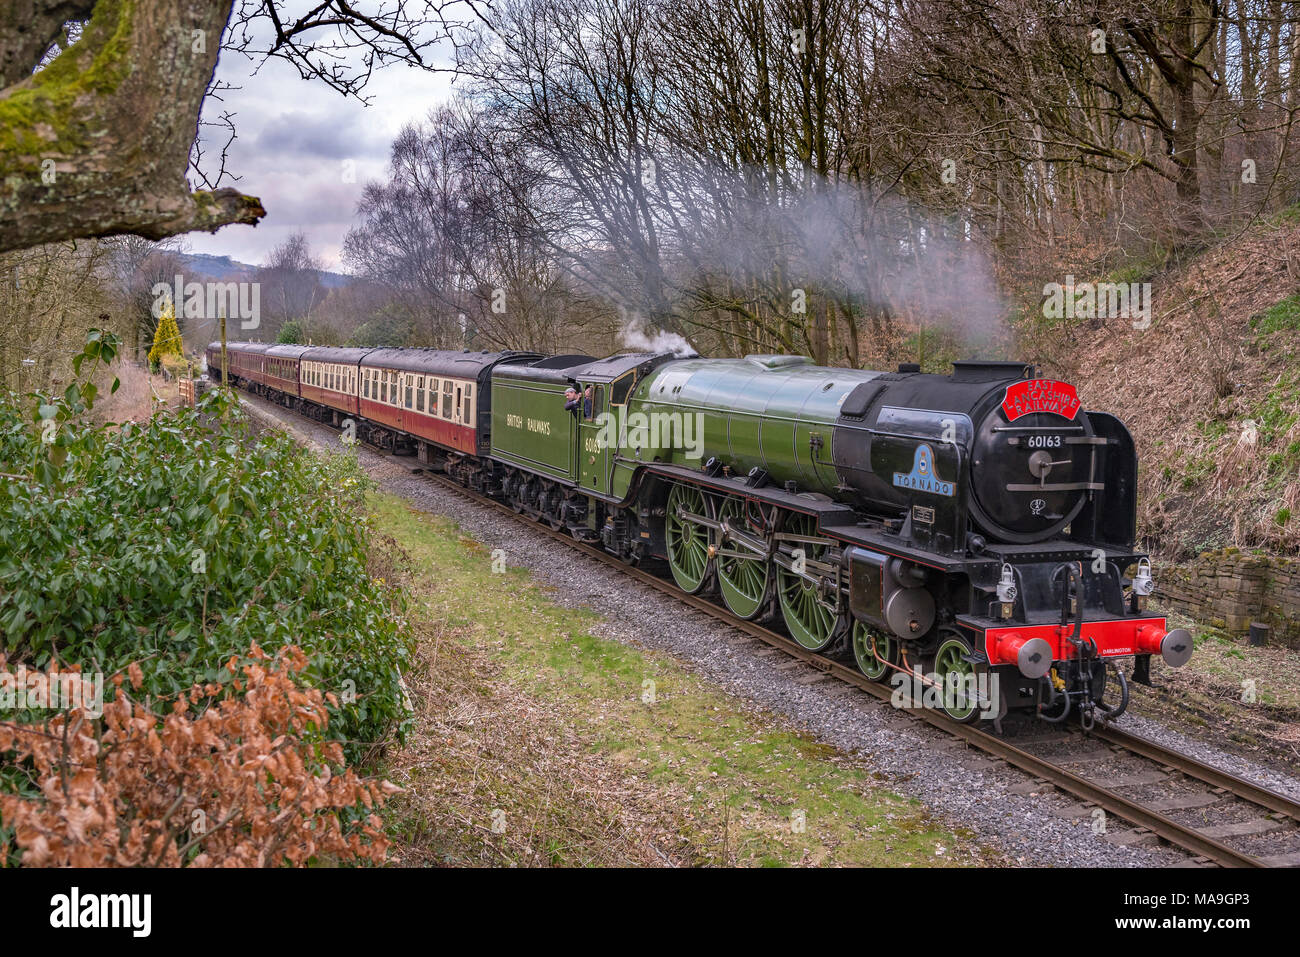 Summerseat, Bury.  United Kingdom.  30th. March 2018. Taking a break from steaming the main line at 100mph, Peppercorn class A1 Pacific locomotive 60163 Tornado takes and Easter break at a sedate 25mph on the East Lancashire heritage railway during their Easter Weeked. Tornado celebrates it's 10th birthday this year. Credit: John Davidson Photos/Alamy Live News Stock Photo